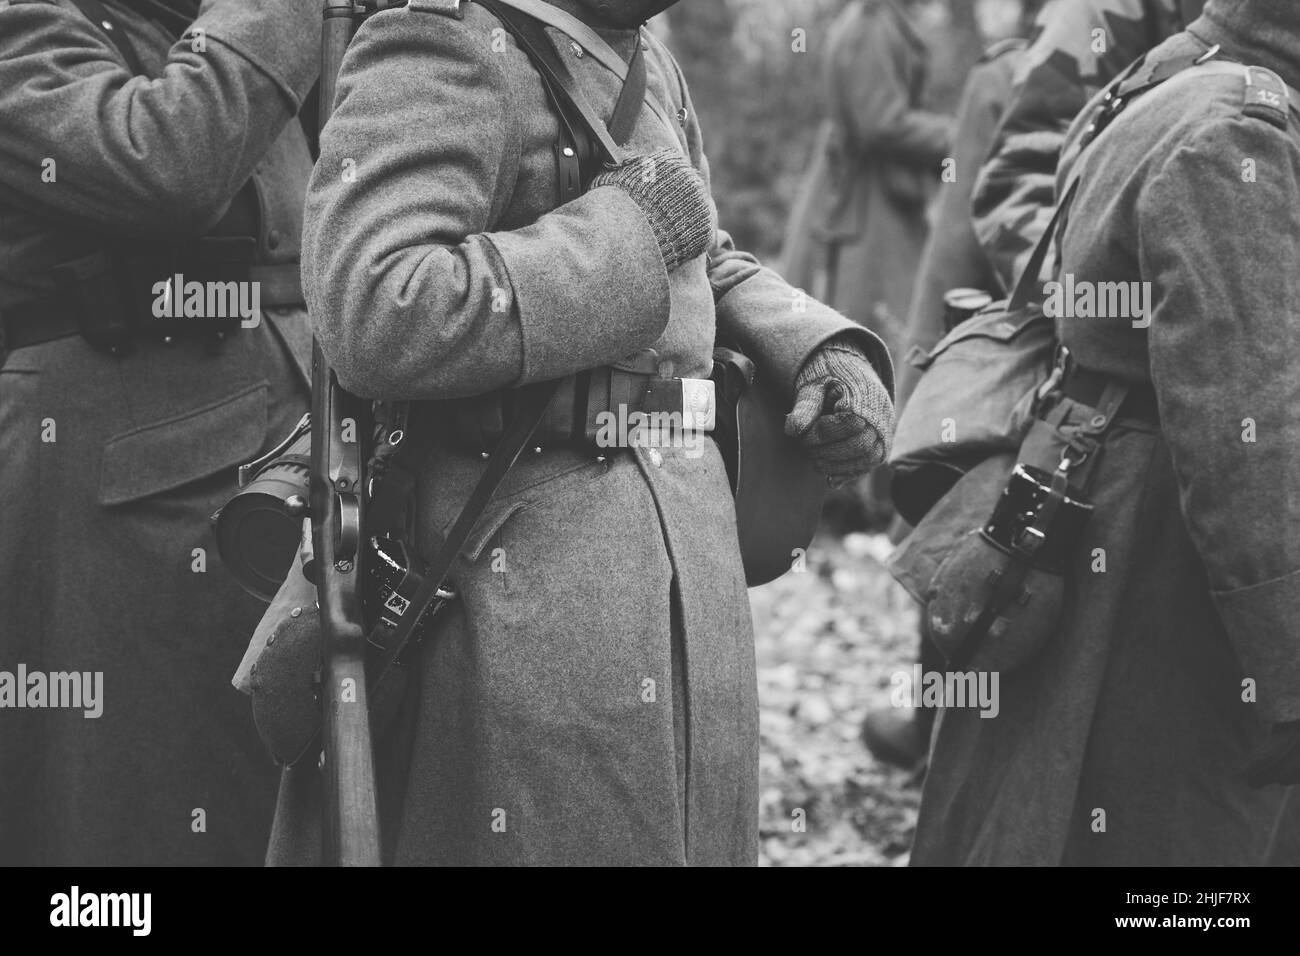 German military ammunition of a German soldier at World War II. Warm autumn clothes, soldier's overcoat, gloves, helmet, pouch, sapper shovel, flask Stock Photo